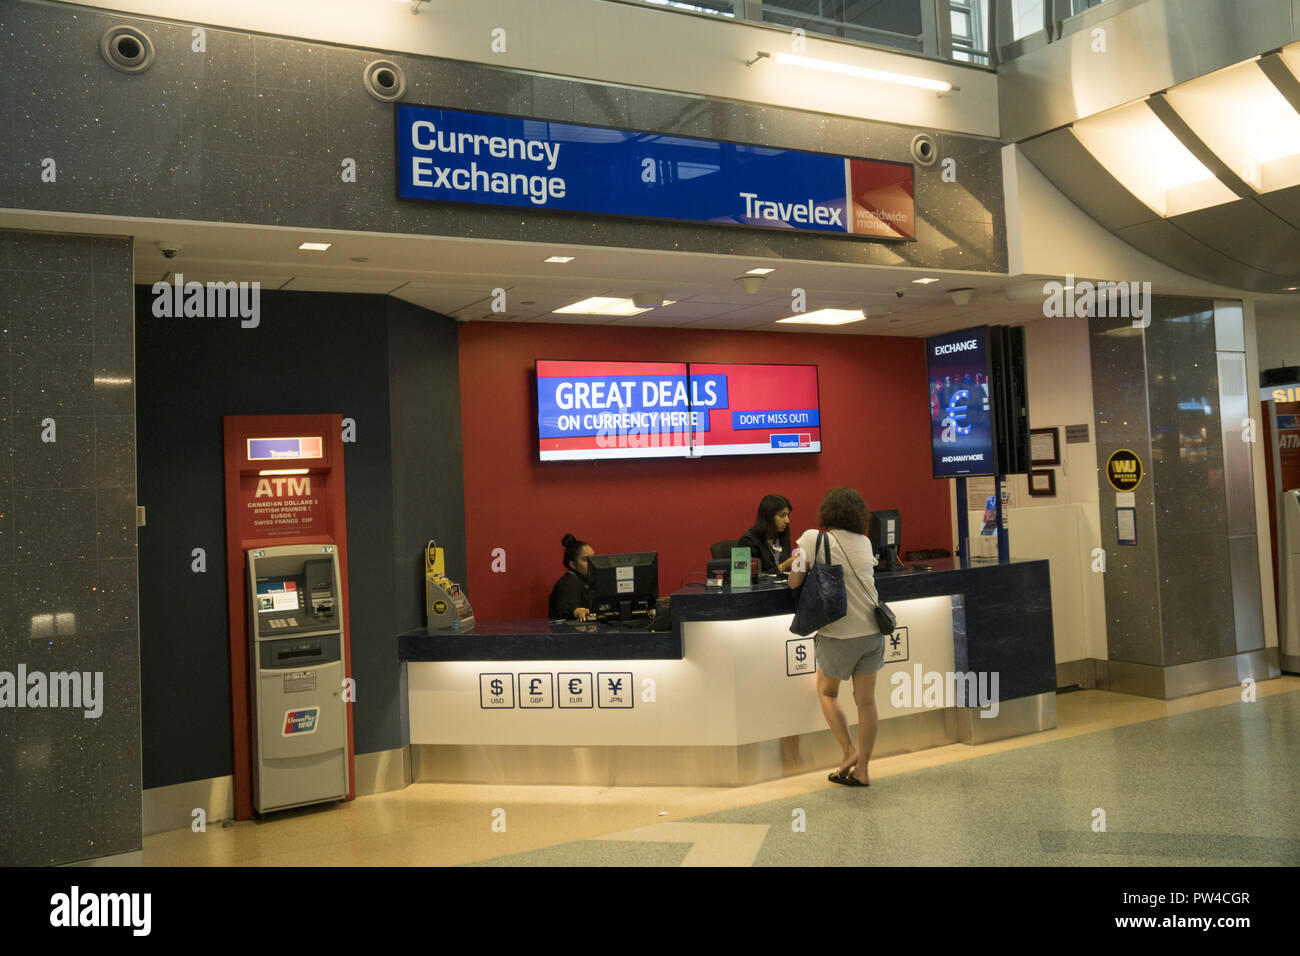 Currency Exchange at an intrnational terminal at JFK Airport in New